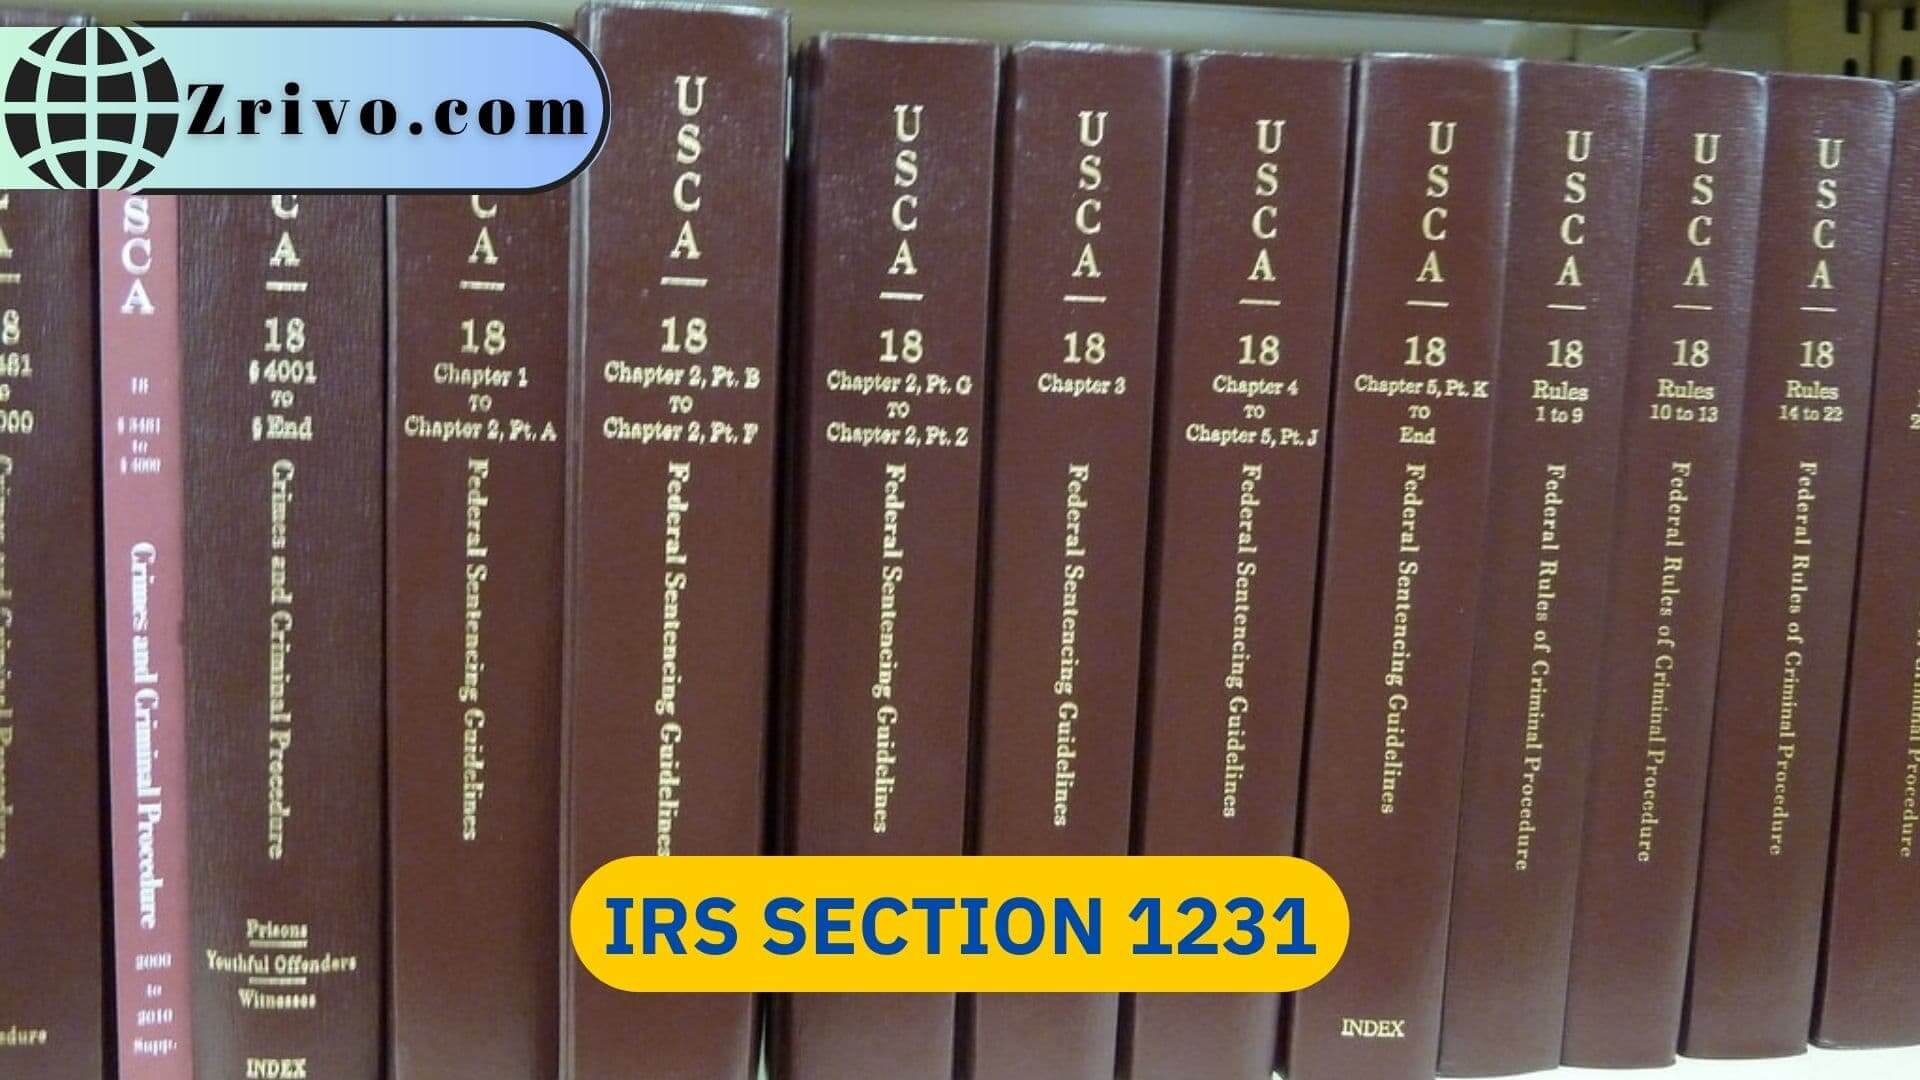 IRS Section 1231